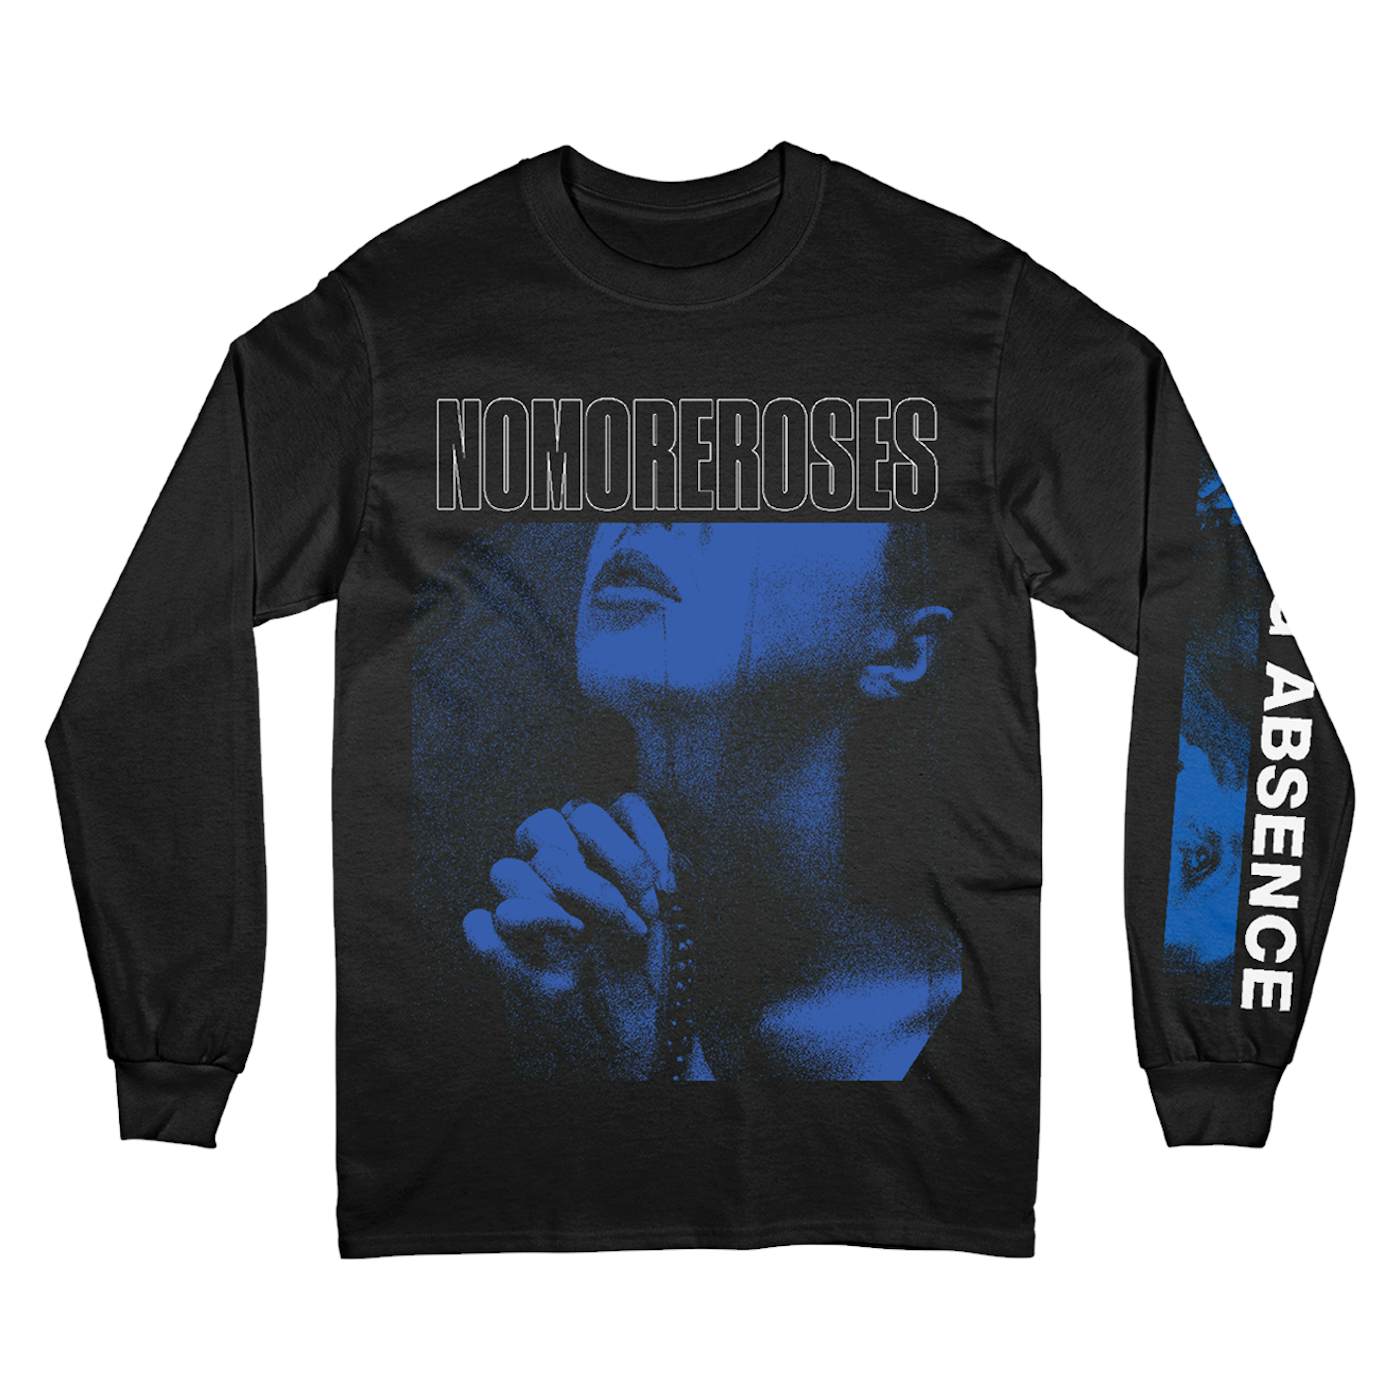 Holding Absence "No More Roses" L/S T-Shirt